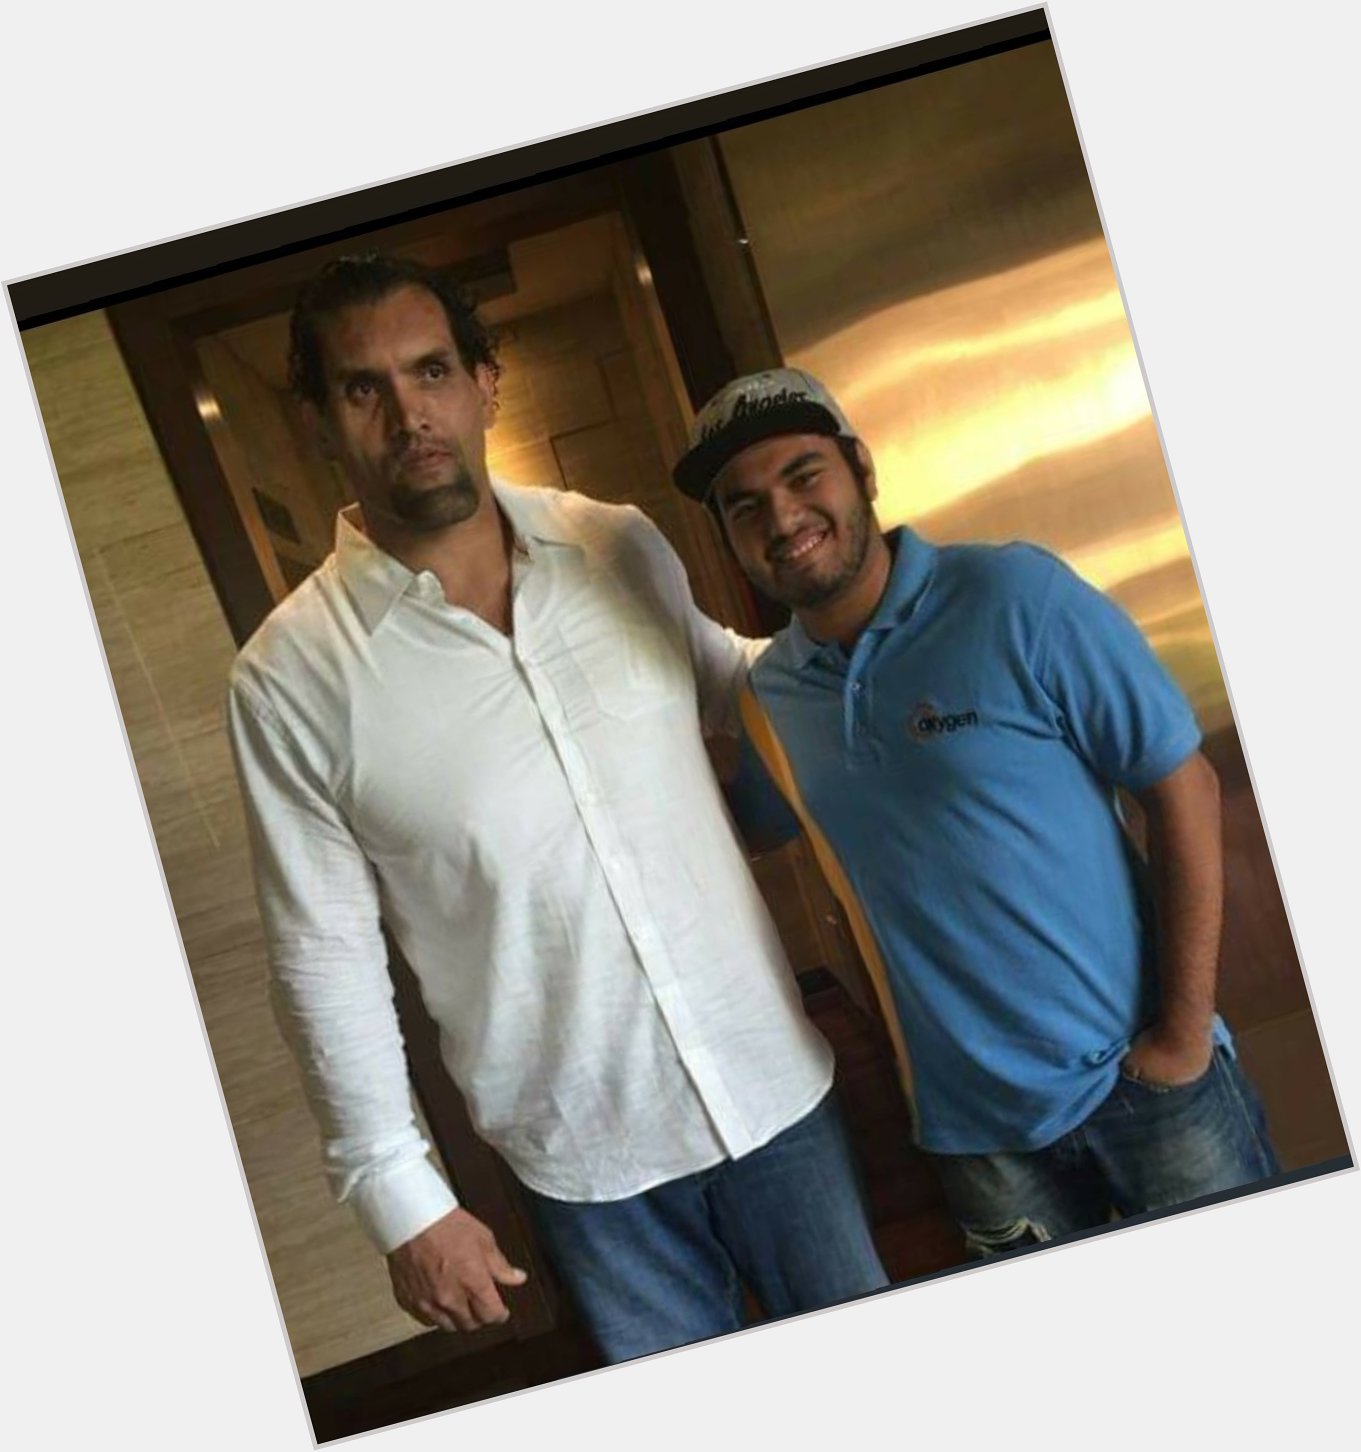 Happy birthday to THE GREAT KHALI! 

He actually makes you feel like a dwarf   